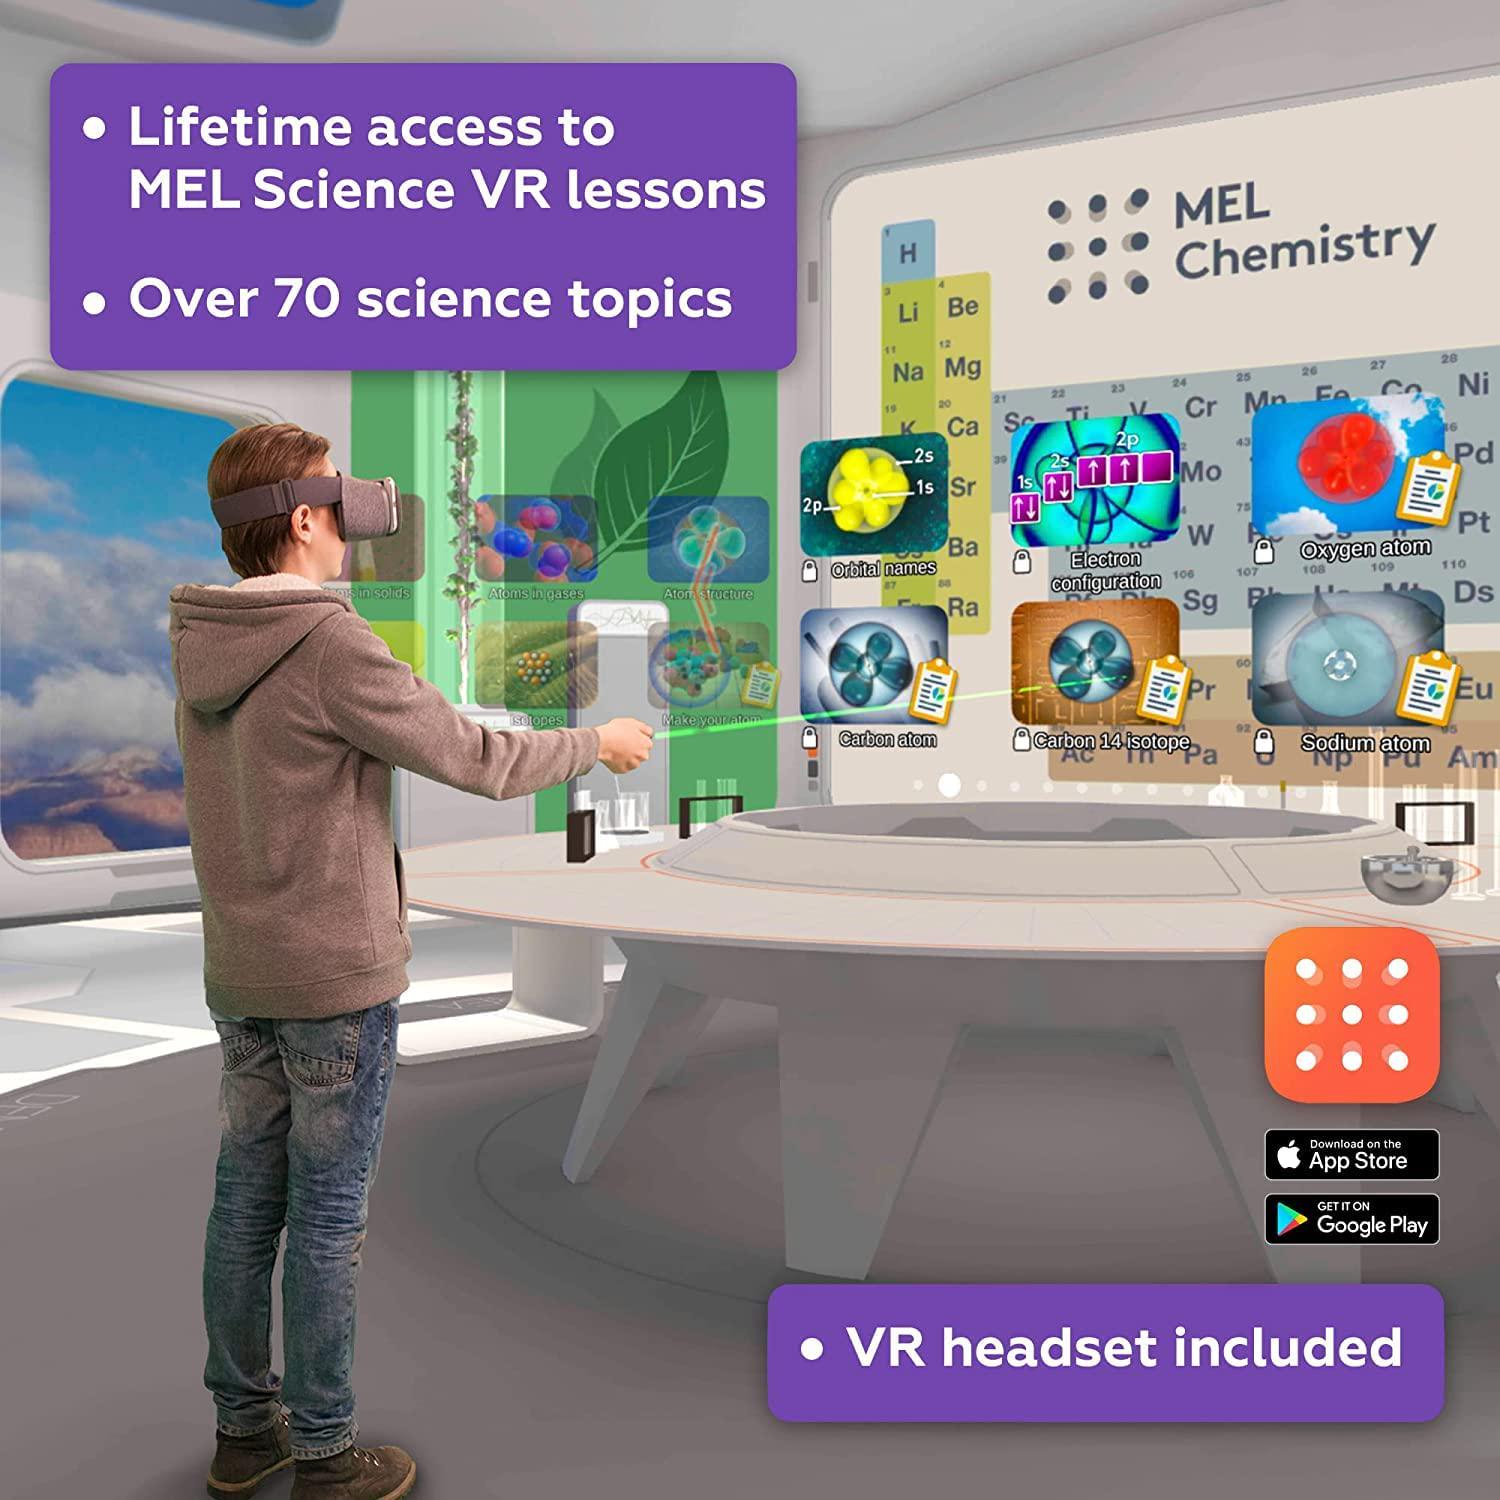 Mel, MEL Chemistry (Starter kit+VR-Headset+2 Boxes Experiments) Science Experiments Chemistry Sets for Kids DIY Educational Science Box Learning and Education Toys Stem Projects for Boys and Girls